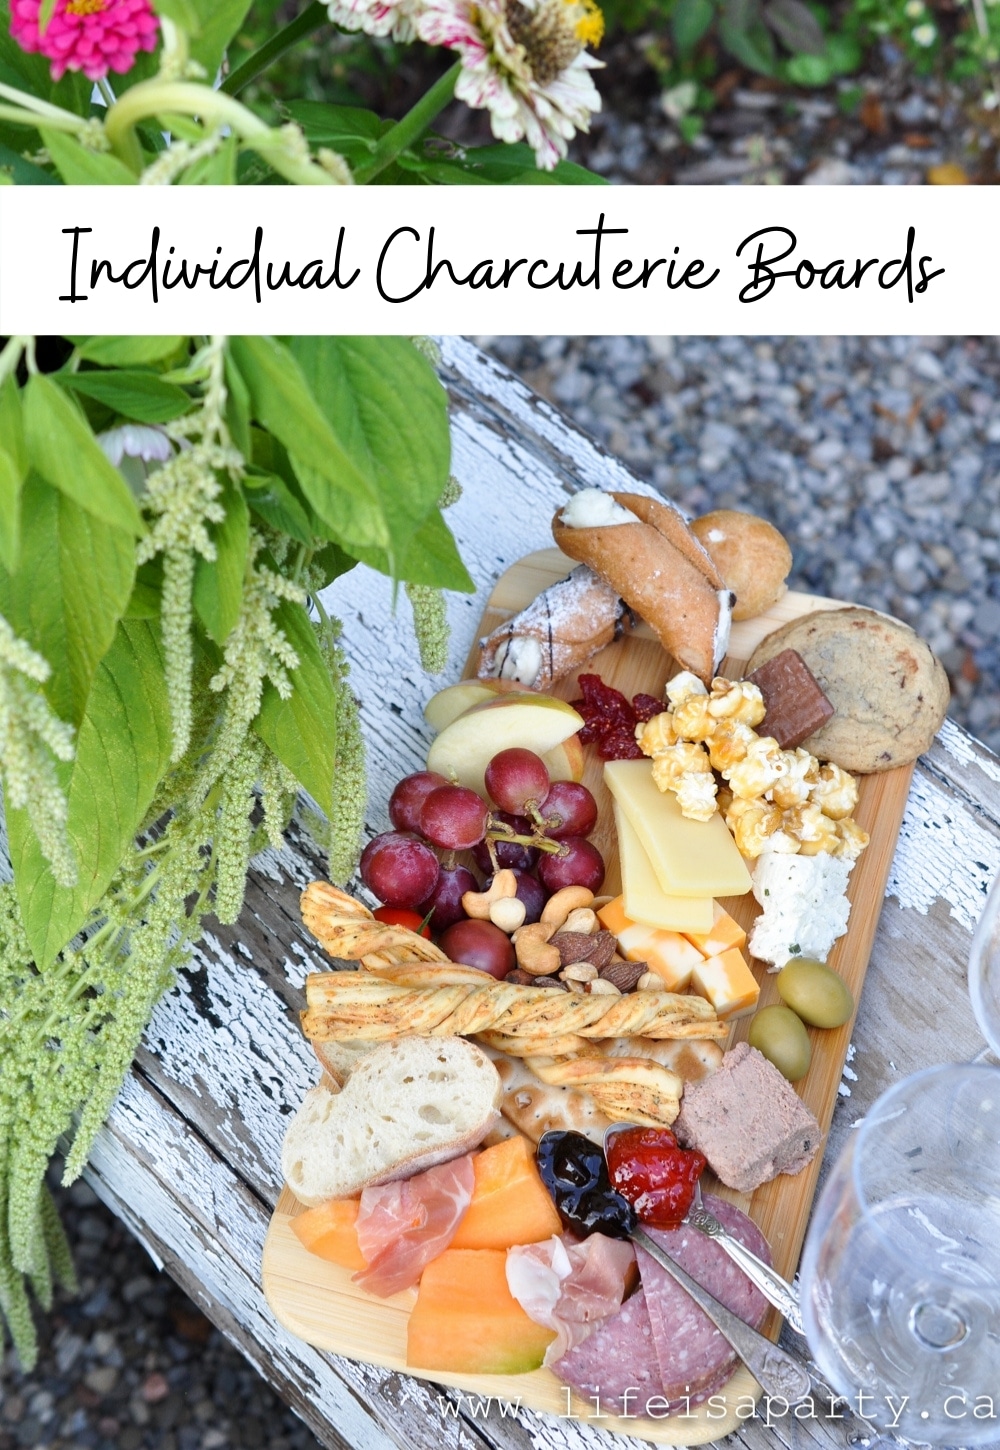 Individual Charcuterie Boards: perfect for entertaining or for date night, full of ideas for cheeses, meats, fruits, sweets and more.